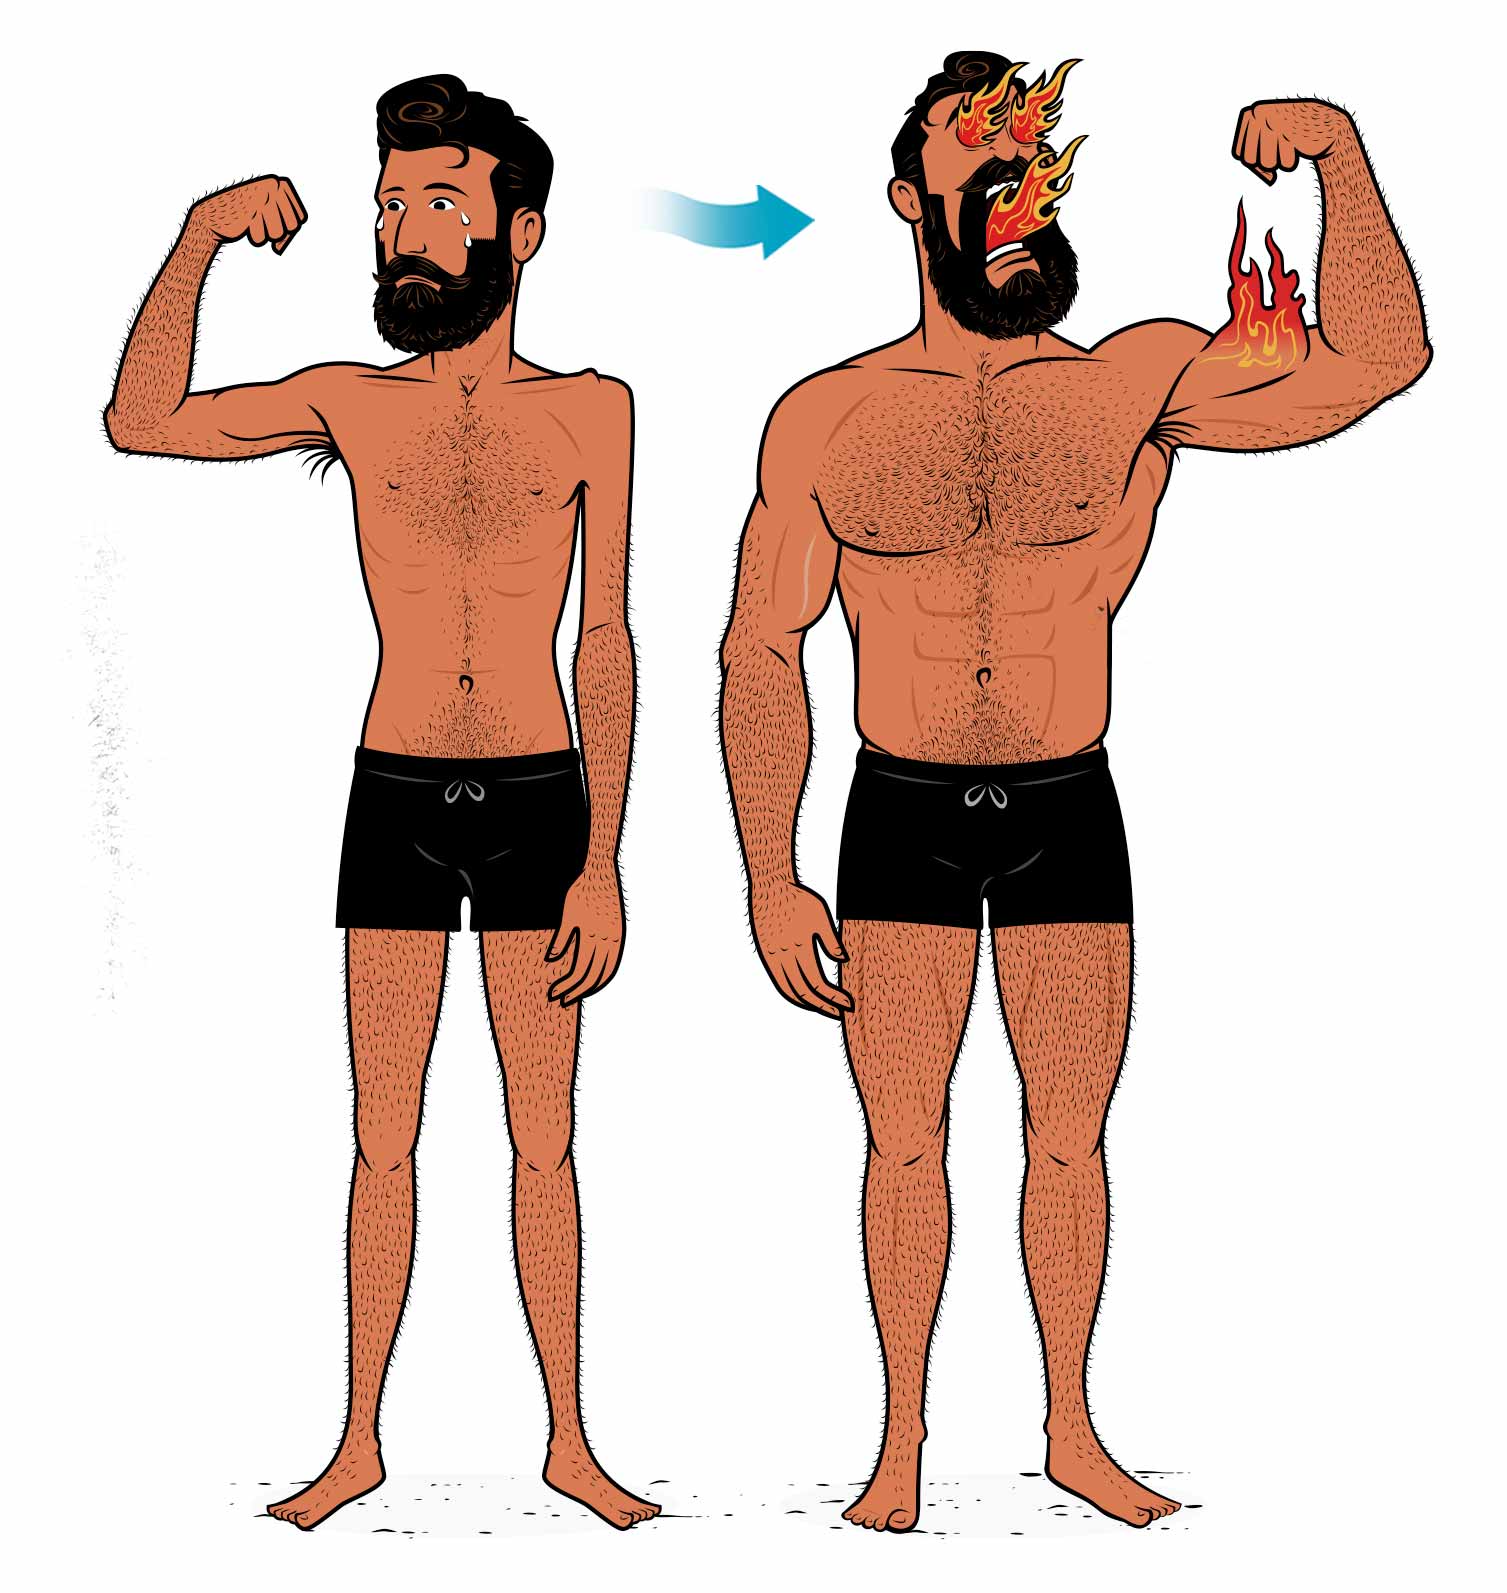 Outlift illustration of a skinny guy gaining muscle mass and becoming strong.